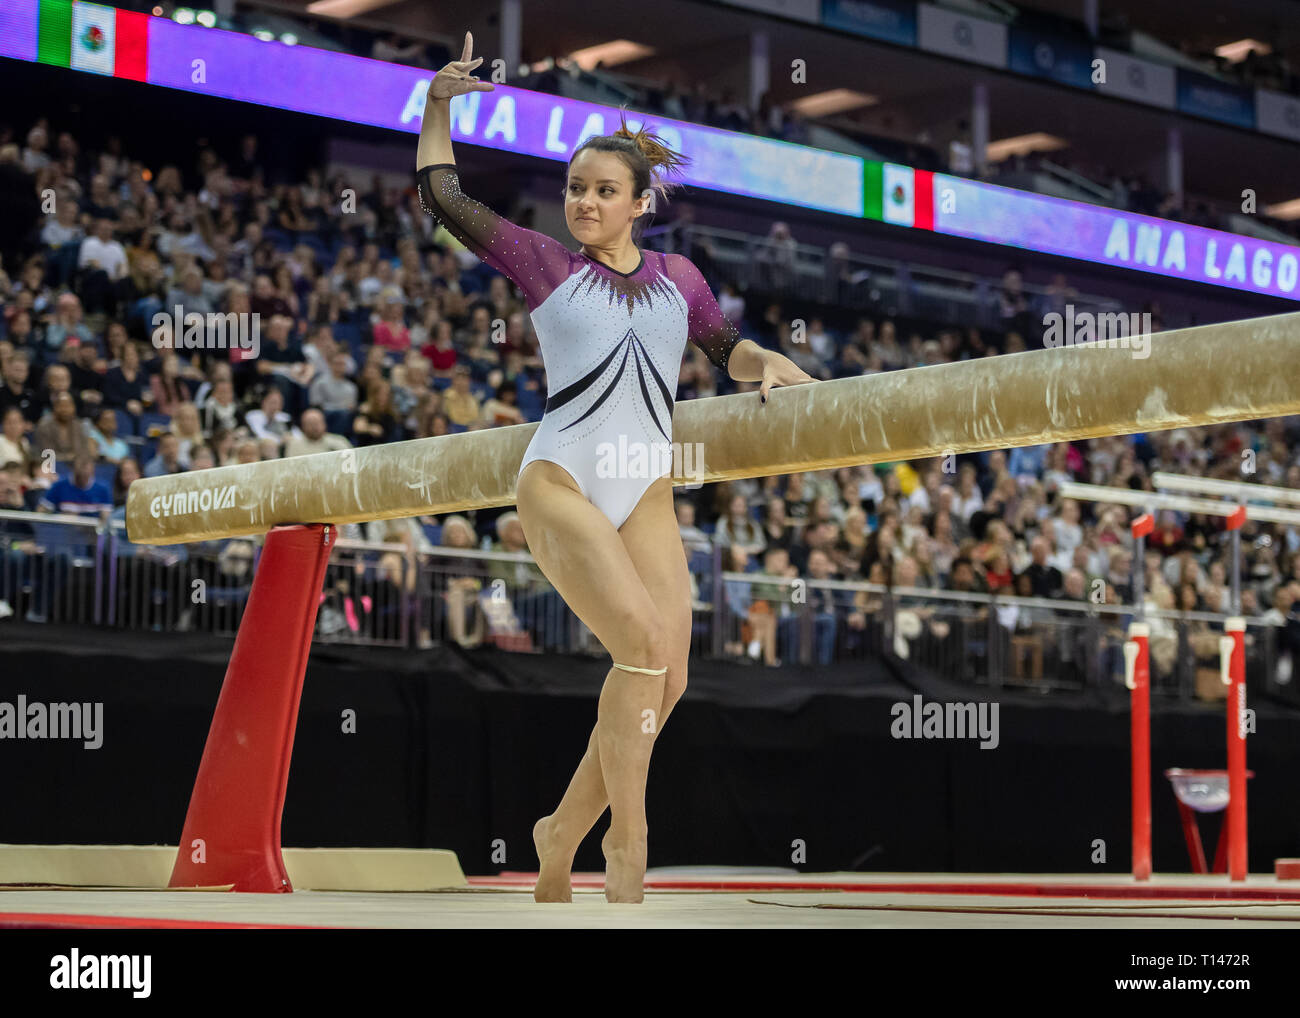 London, UK. 23rd March, 2019. Ana Lago of Mexico performs on the Beam during the Matchroom Multisport presents the 2019 Superstars of Gymnastics at The O2 Arena on Saturday, 23 March 2019. LONDON ENGLAND. Credit: Taka G Wu/Alamy News Stock Photo